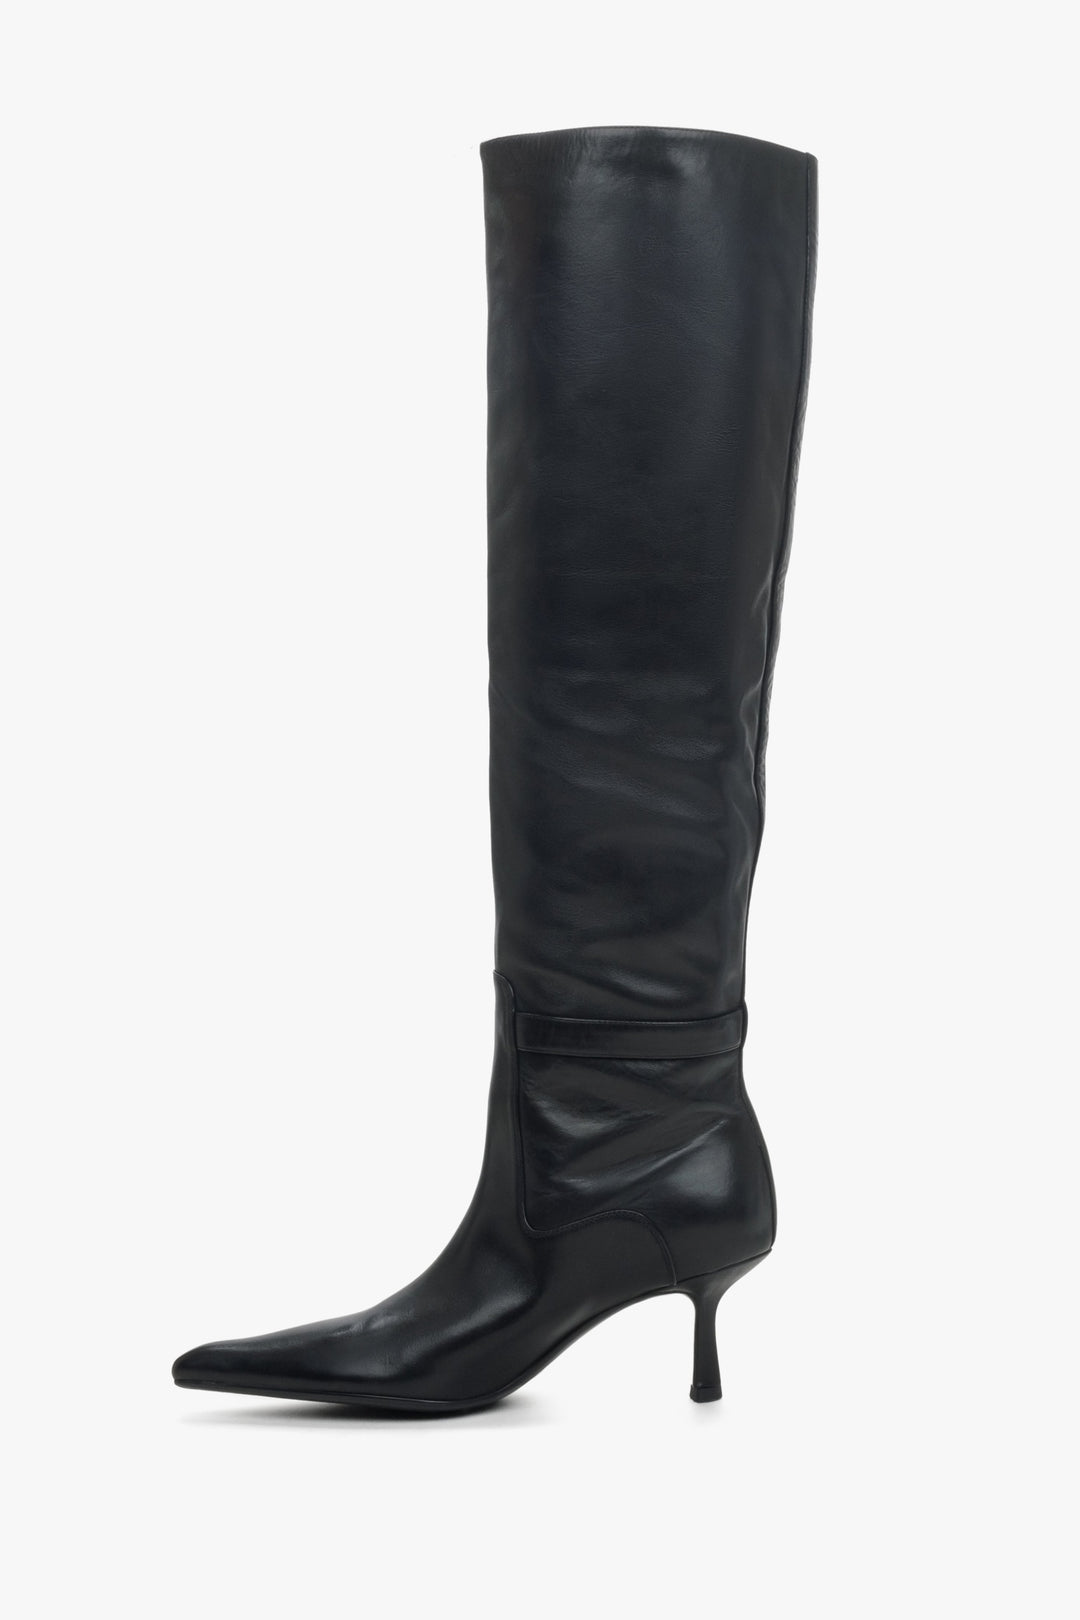 Women's leather boots in black by Estro - shoe profile.